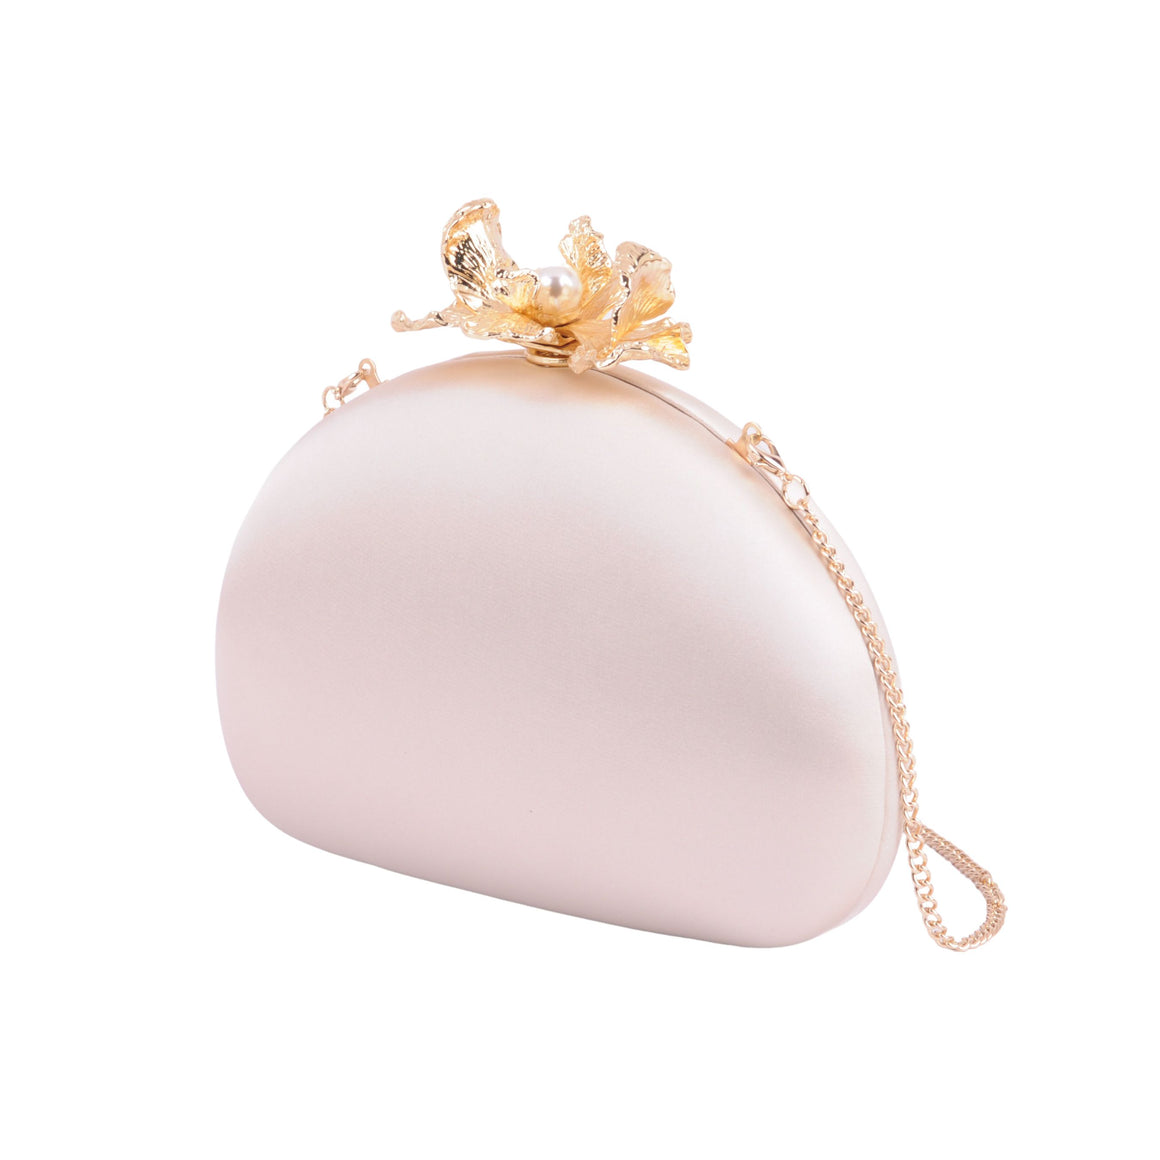 1612 - Floral Grace: Silk Round Clutch with Intricate Flower Hardware and Chain Crossbody Strap